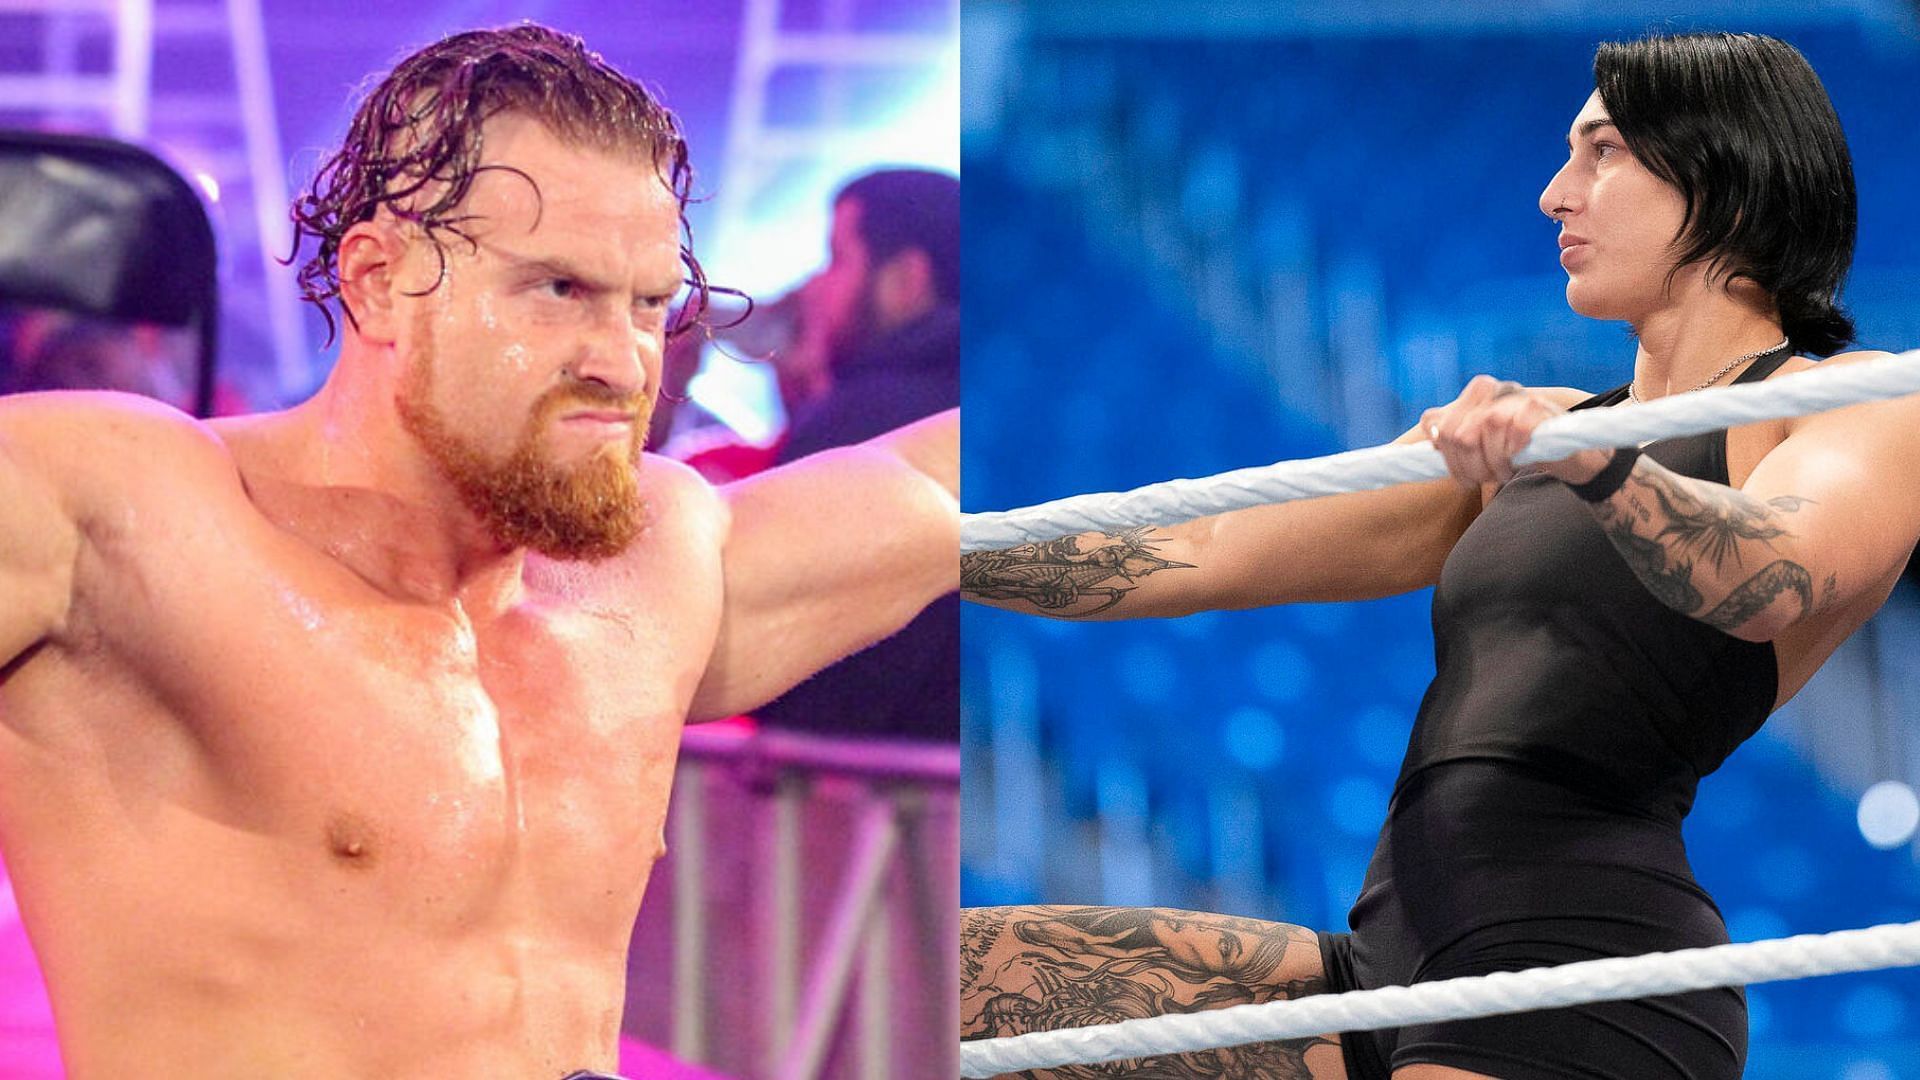 Buddy Murphy sent a wholesome message to Rhea Ripley